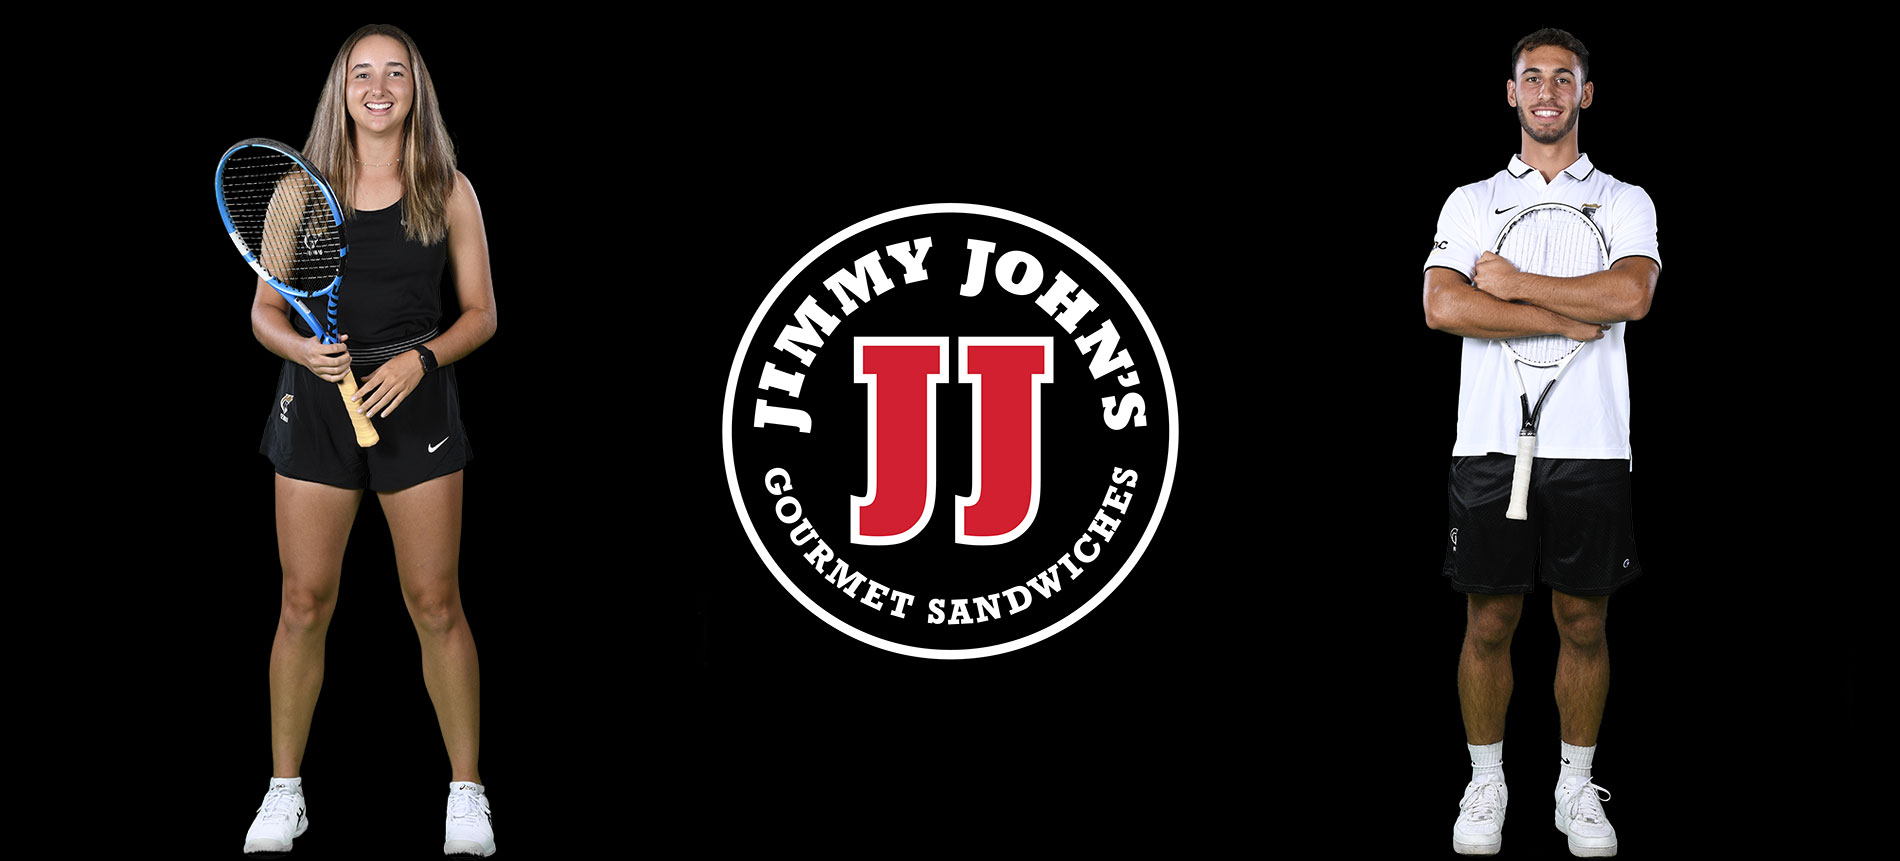 Catherine Blouin and Lorenzo Martinetti Named Jimmy John’s Female and Male Athletes of the Week